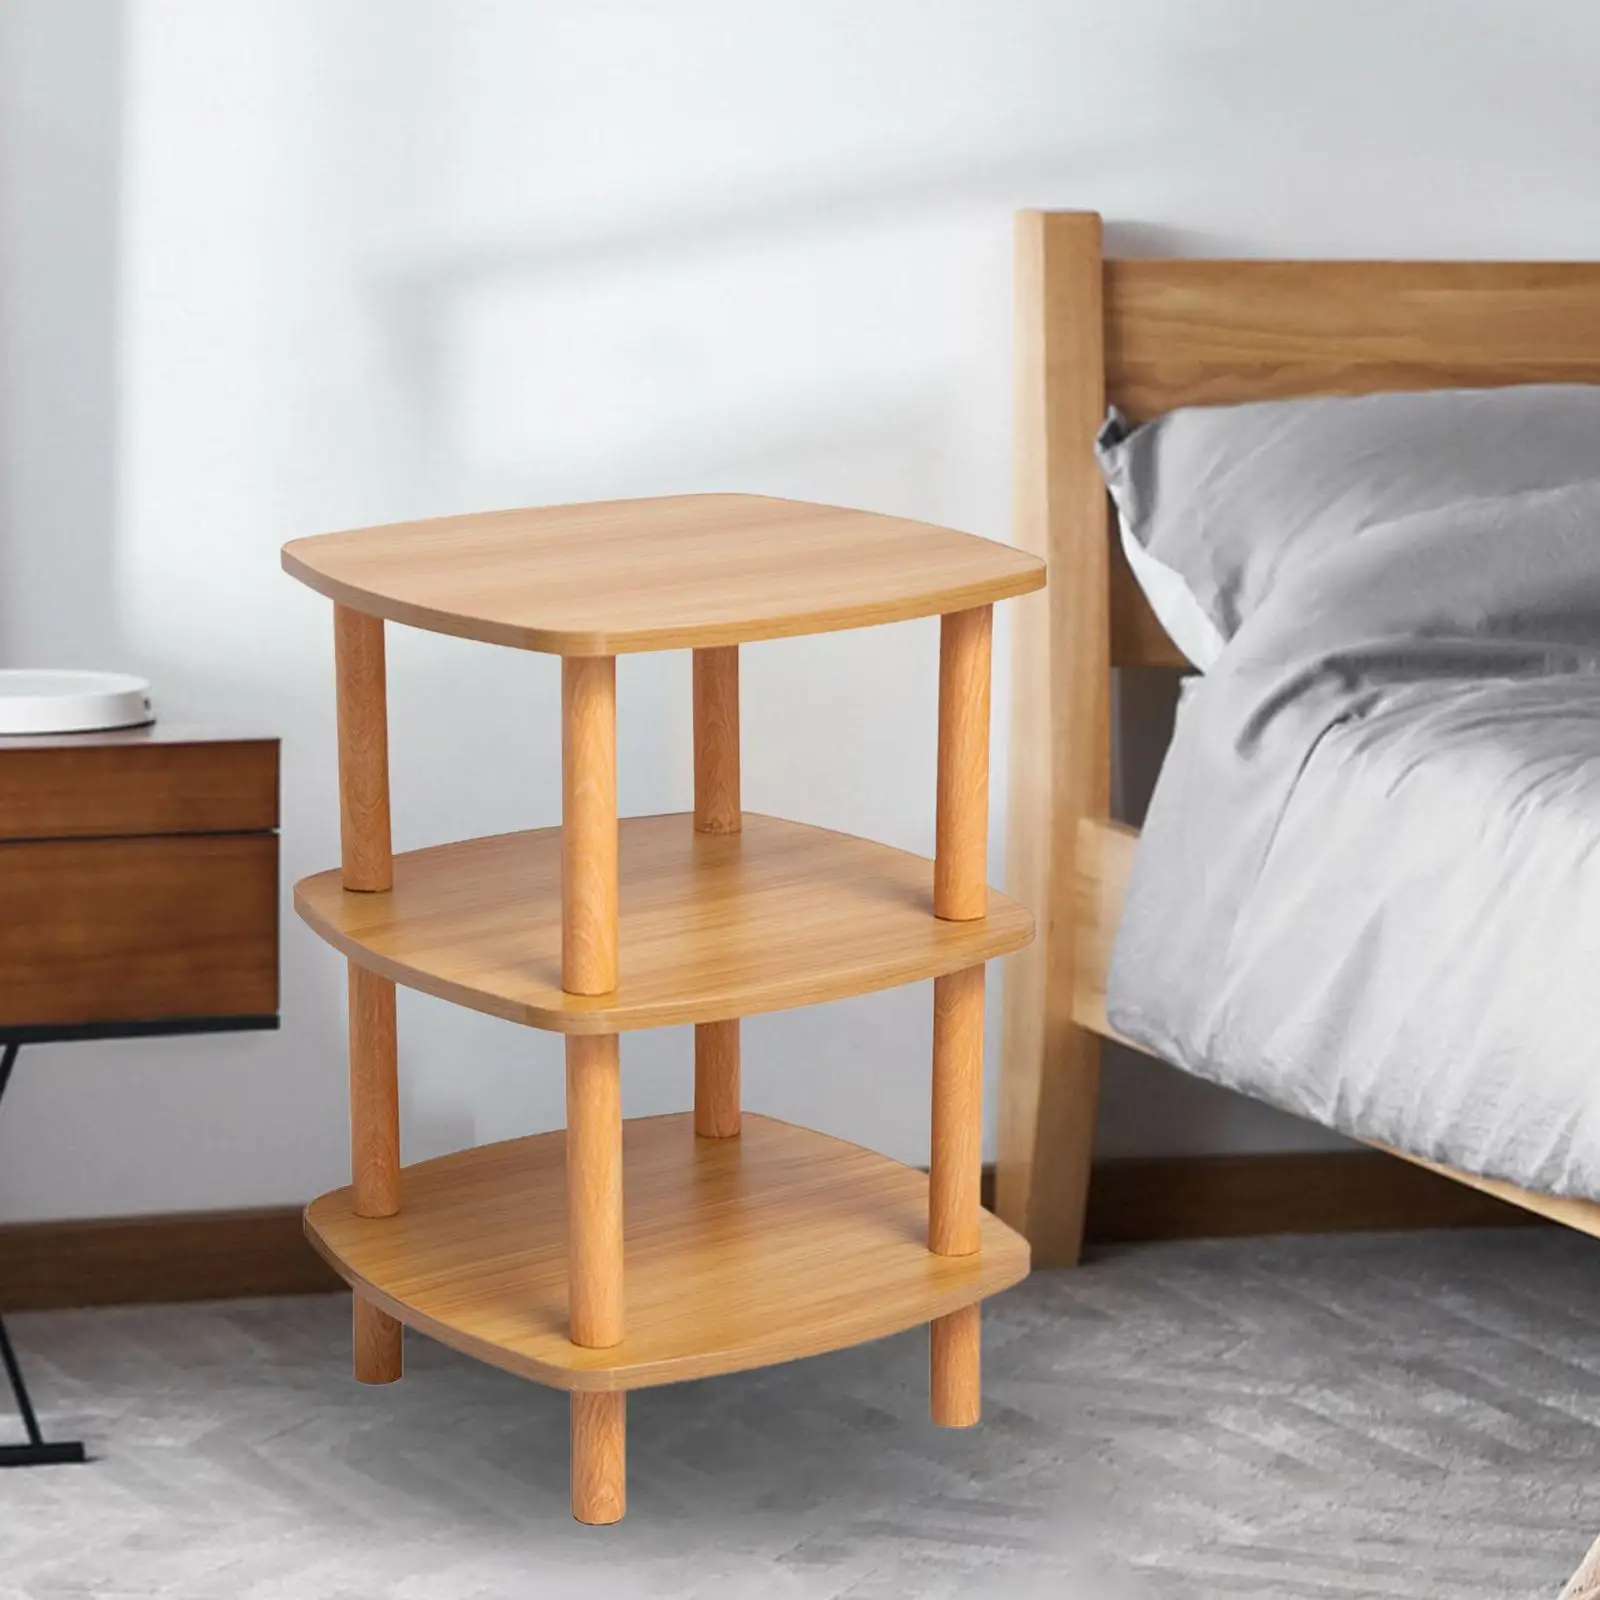 Small Side Table 3 Tier Living Room Mobile Small NightStand Drink Table Thin Side Table End Table Bedside Small Square Table